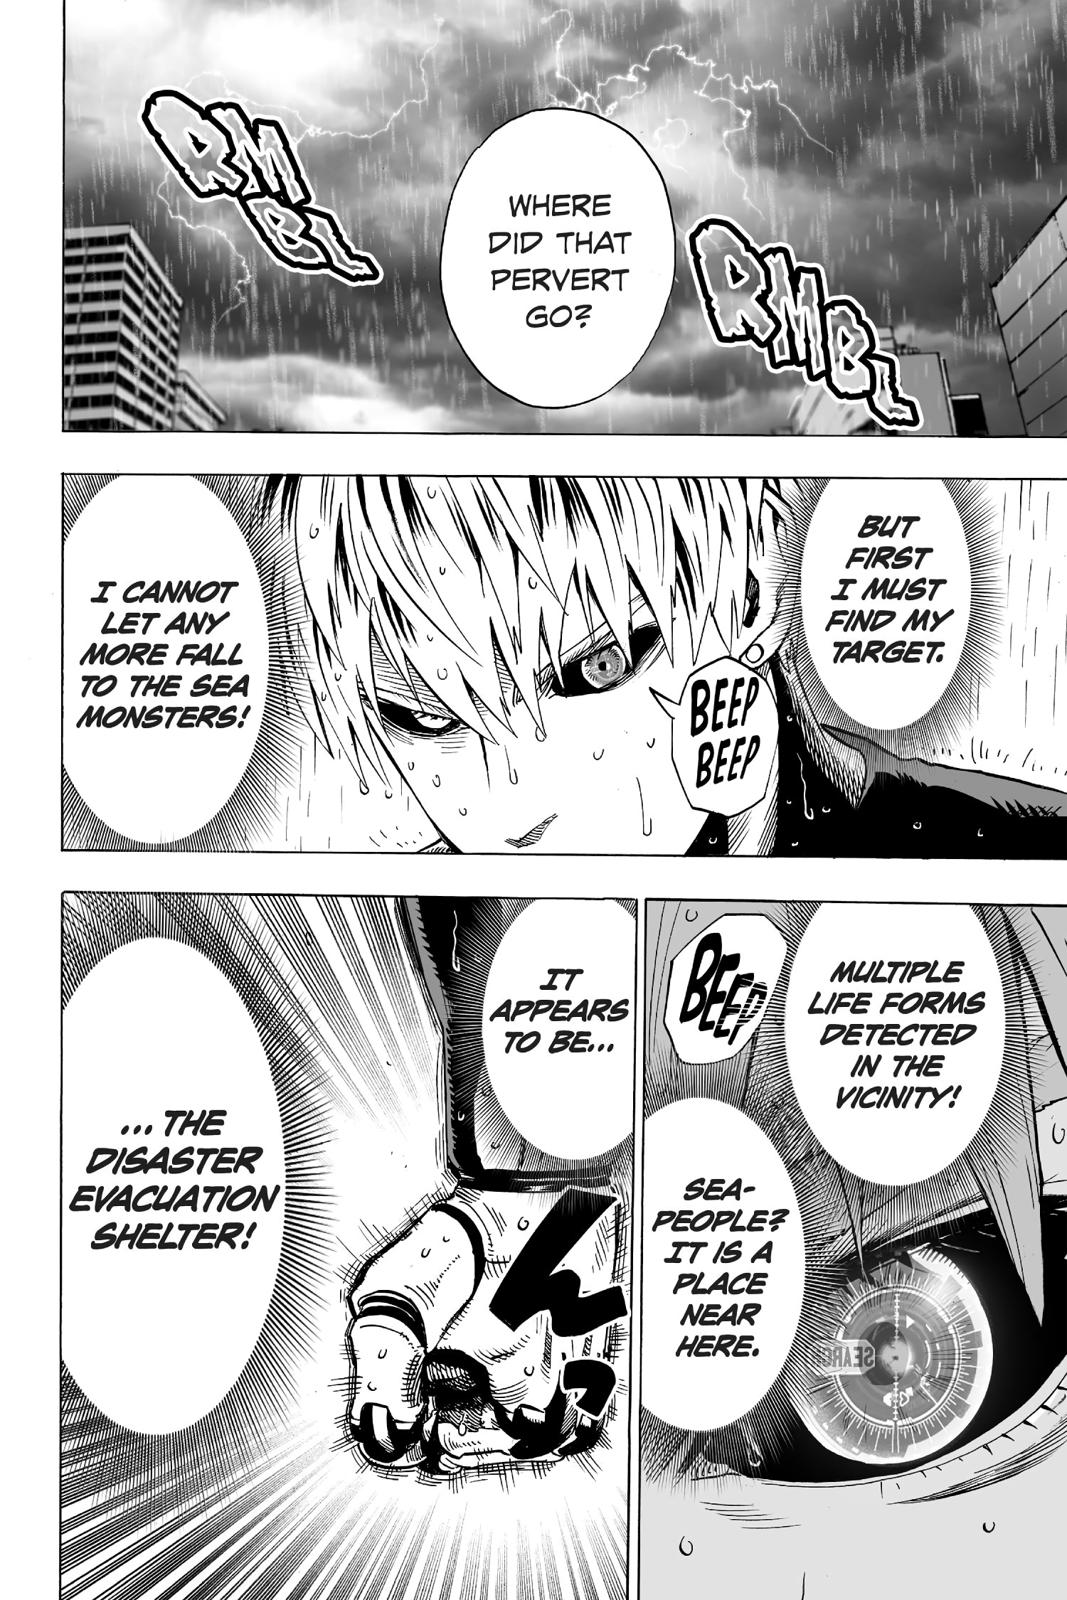 One-Punch Man, Punch 25 image 56